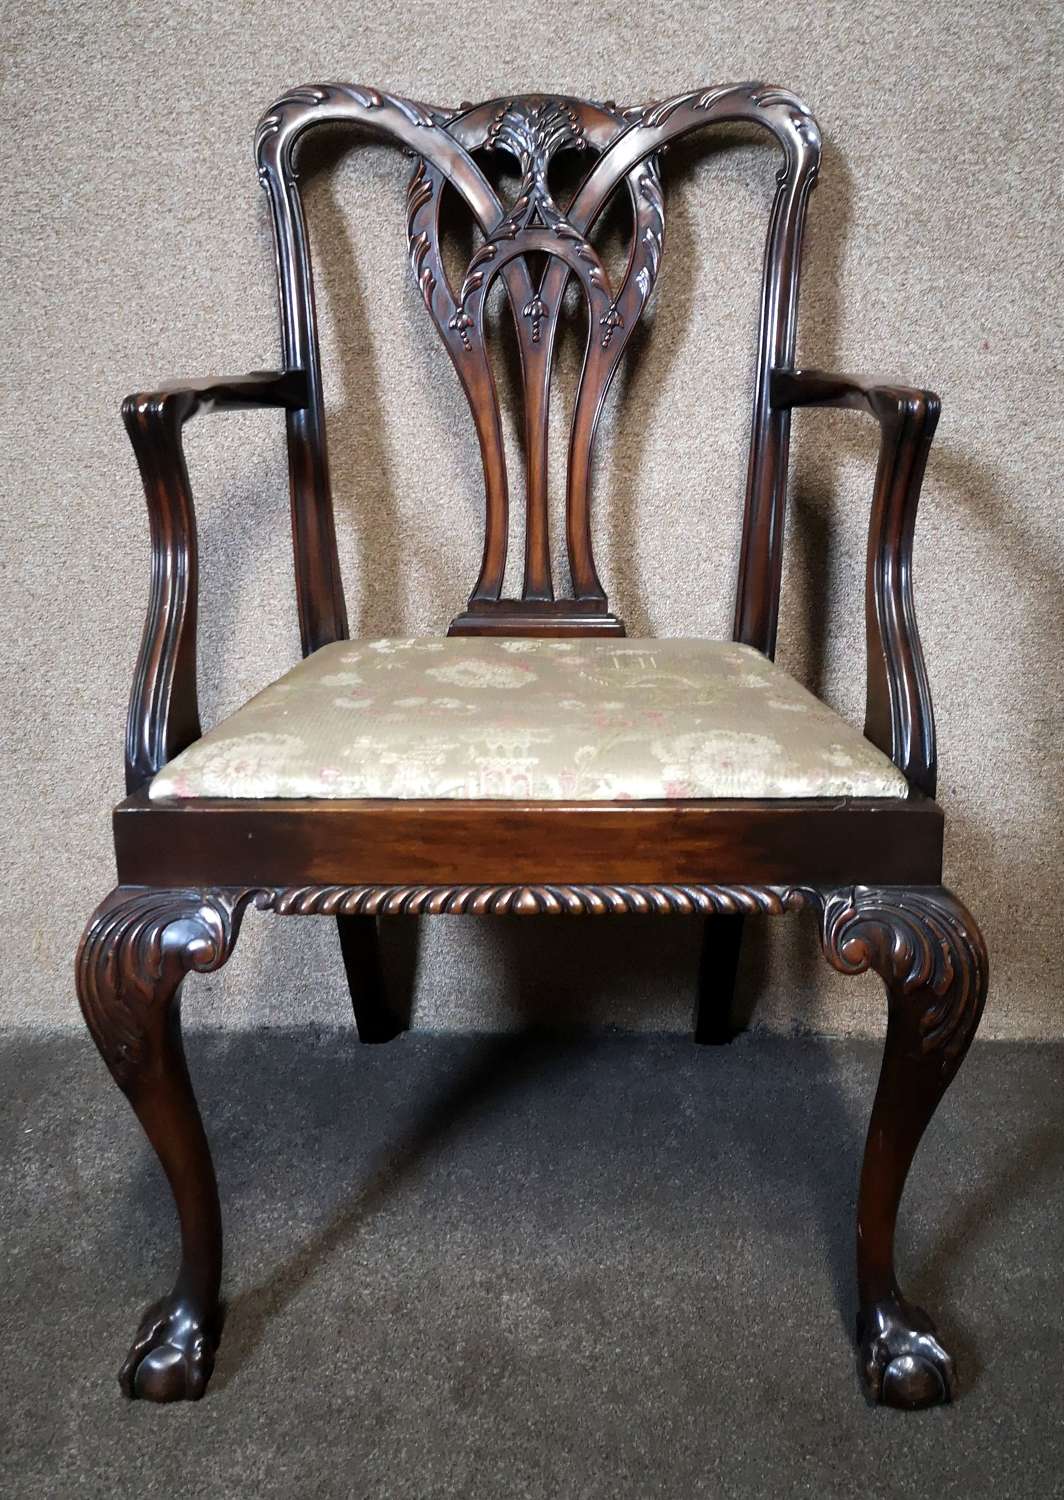 A Chippendale Style Mahogany Ball and Claw Desk / Arm Chair